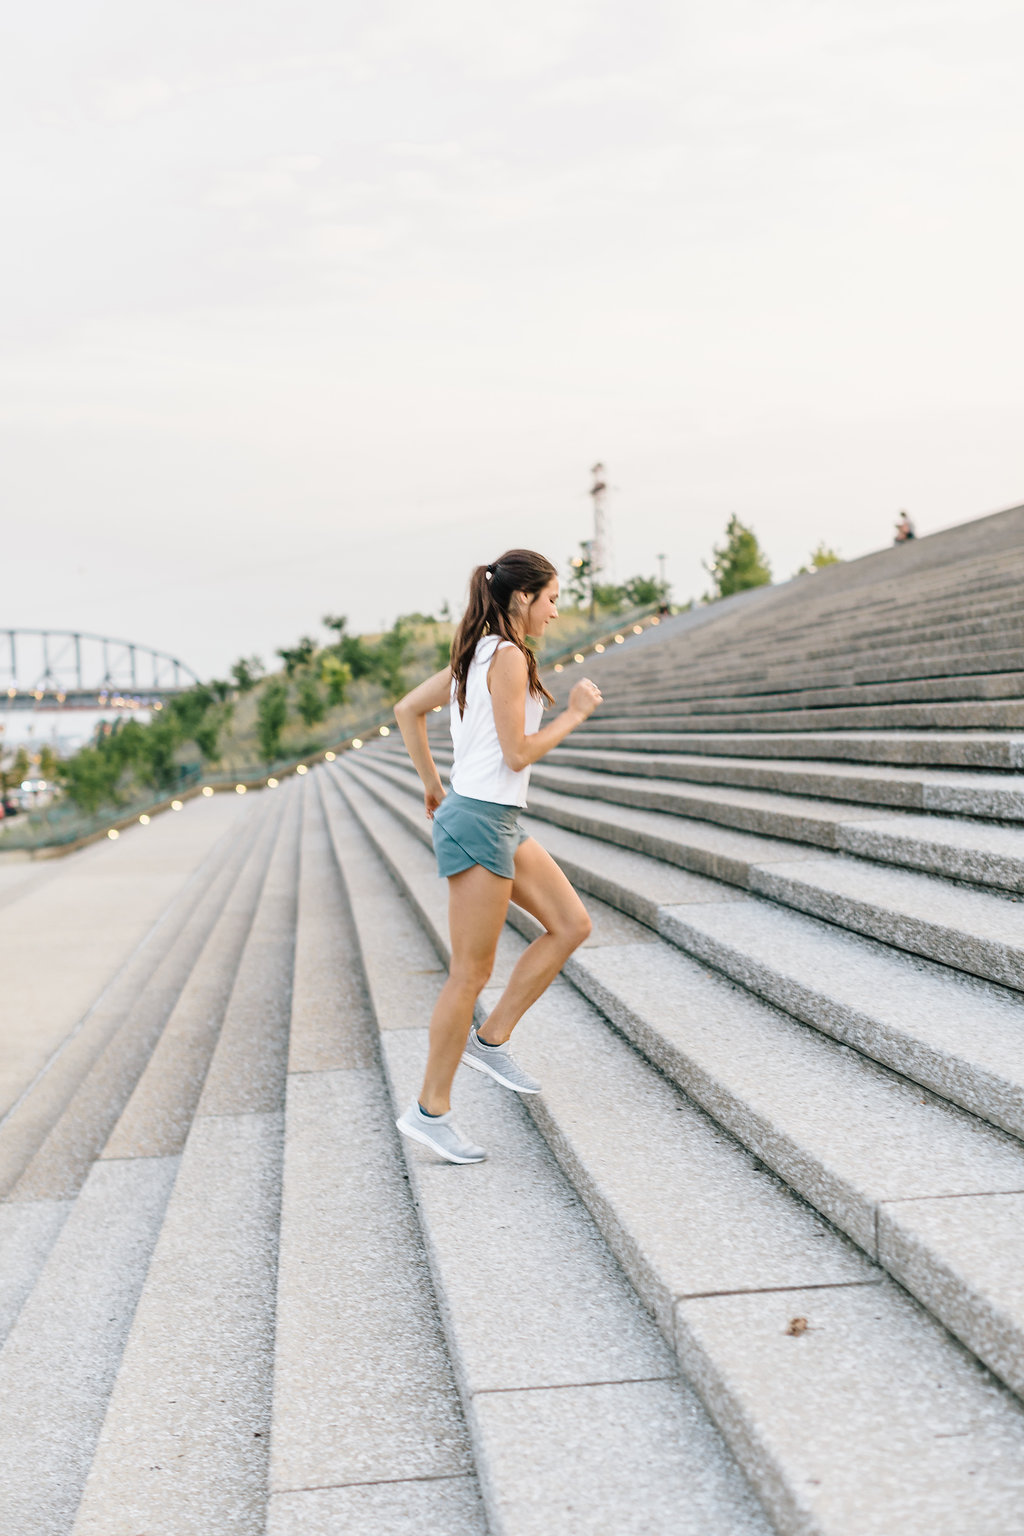 Nourished by Nutrition wellness index running stairs